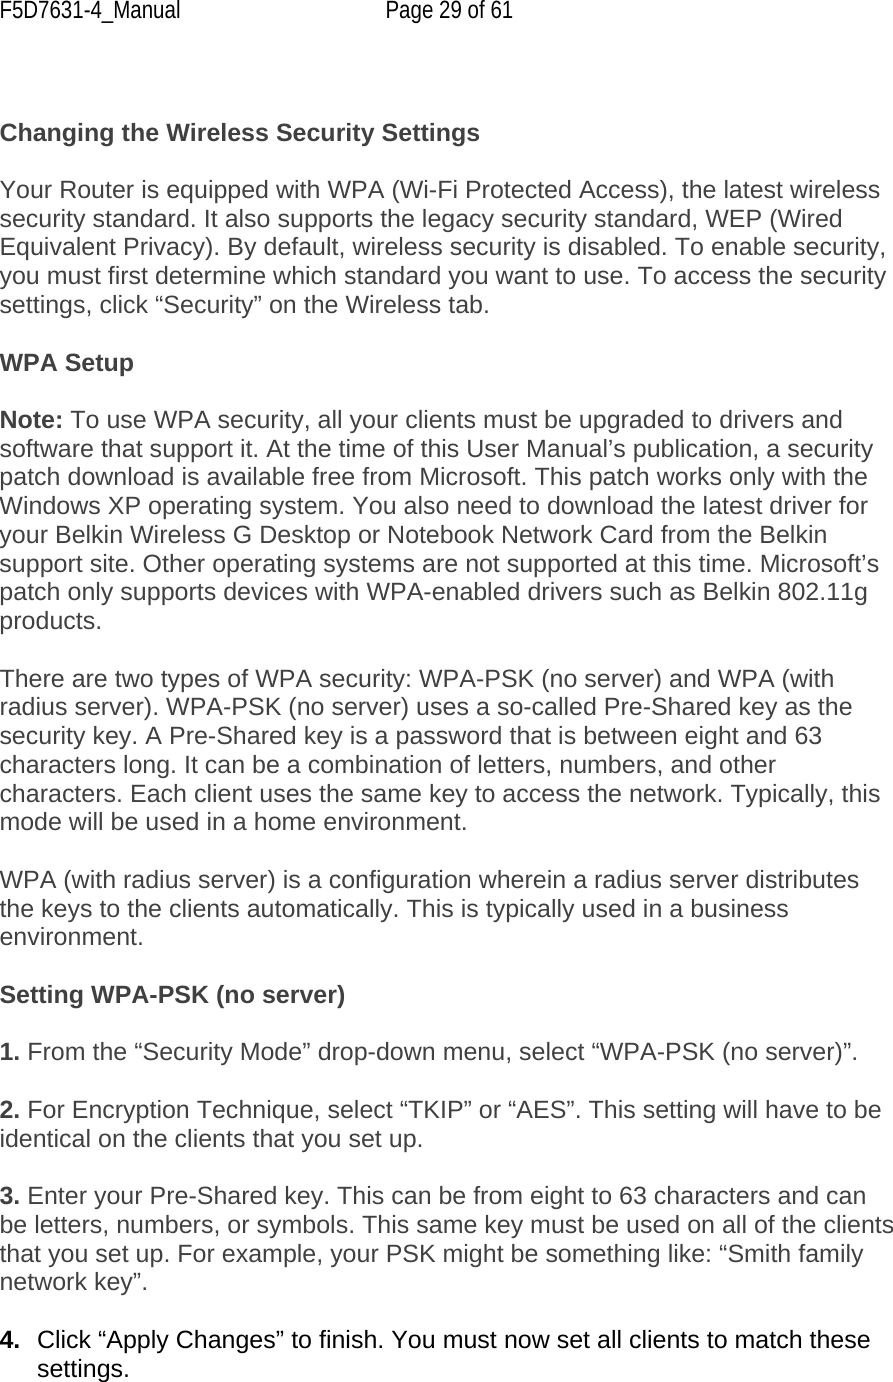 F5D7631-4_Manual  Page 29 of 61   Changing the Wireless Security Settings  Your Router is equipped with WPA (Wi-Fi Protected Access), the latest wireless security standard. It also supports the legacy security standard, WEP (Wired Equivalent Privacy). By default, wireless security is disabled. To enable security, you must first determine which standard you want to use. To access the security settings, click “Security” on the Wireless tab.  WPA Setup  Note: To use WPA security, all your clients must be upgraded to drivers and software that support it. At the time of this User Manual’s publication, a security patch download is available free from Microsoft. This patch works only with the Windows XP operating system. You also need to download the latest driver for your Belkin Wireless G Desktop or Notebook Network Card from the Belkin support site. Other operating systems are not supported at this time. Microsoft’s patch only supports devices with WPA-enabled drivers such as Belkin 802.11g products.  There are two types of WPA security: WPA-PSK (no server) and WPA (with radius server). WPA-PSK (no server) uses a so-called Pre-Shared key as the security key. A Pre-Shared key is a password that is between eight and 63 characters long. It can be a combination of letters, numbers, and other characters. Each client uses the same key to access the network. Typically, this mode will be used in a home environment.  WPA (with radius server) is a configuration wherein a radius server distributes the keys to the clients automatically. This is typically used in a business environment.  Setting WPA-PSK (no server)  1. From the “Security Mode” drop-down menu, select “WPA-PSK (no server)”.  2. For Encryption Technique, select “TKIP” or “AES”. This setting will have to be identical on the clients that you set up.  3. Enter your Pre-Shared key. This can be from eight to 63 characters and can be letters, numbers, or symbols. This same key must be used on all of the clients that you set up. For example, your PSK might be something like: “Smith family network key”.  4.  Click “Apply Changes” to finish. You must now set all clients to match these settings.  